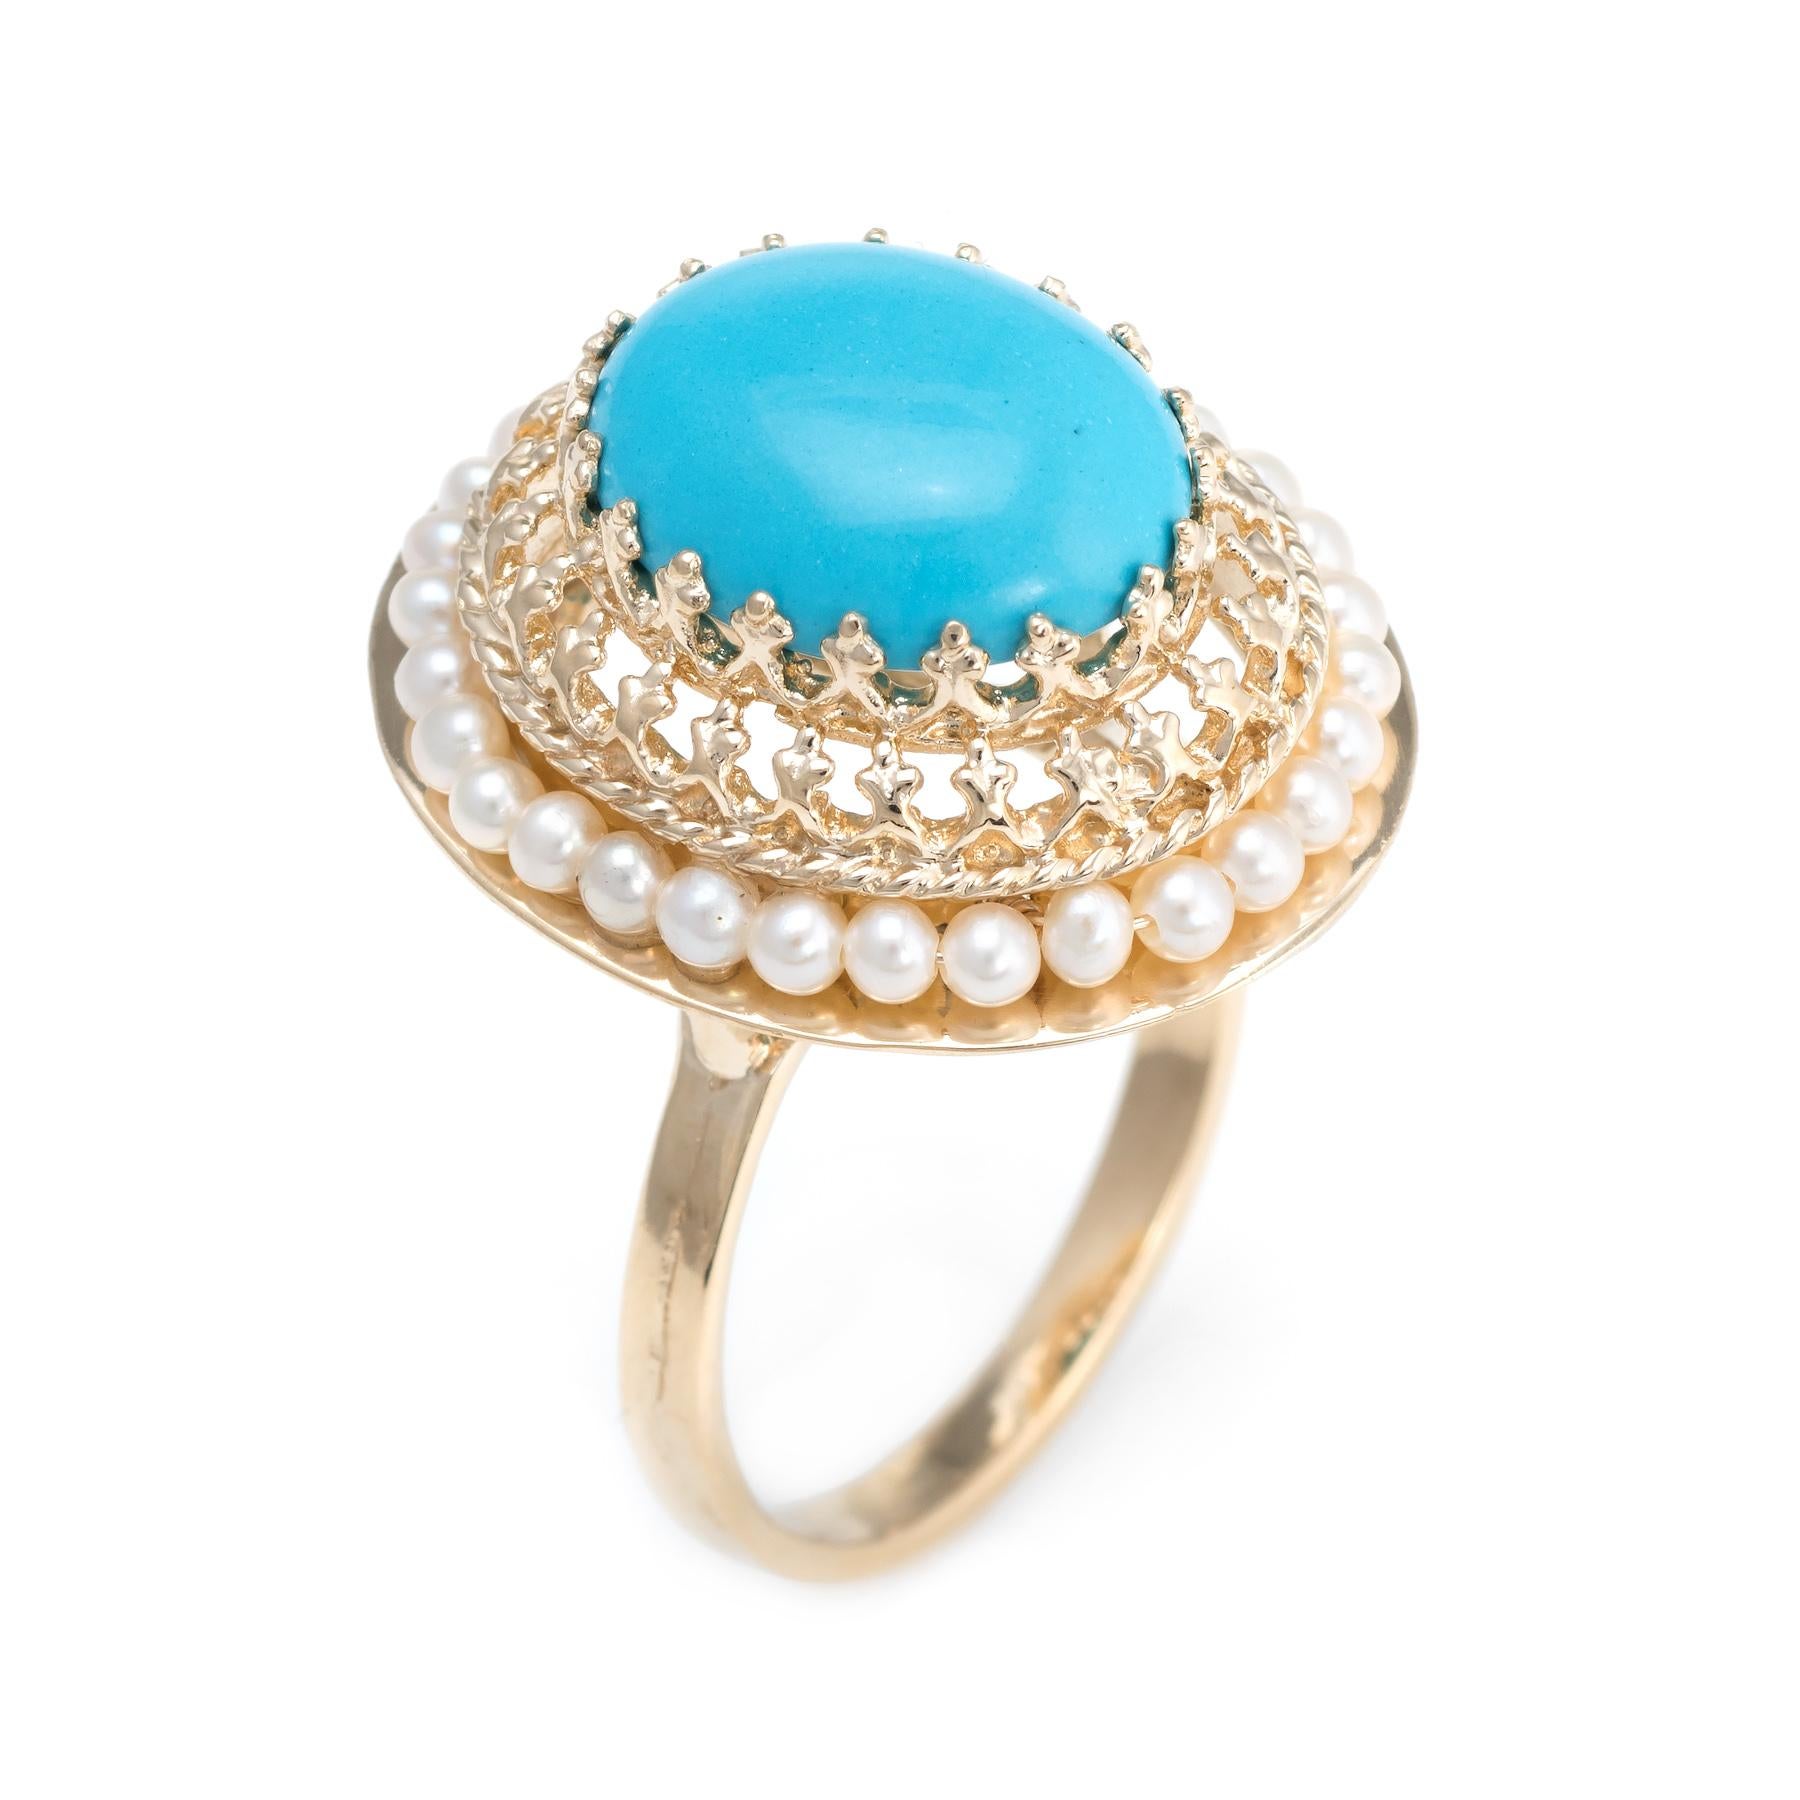 Finely detailed estate turquoise and seed pearl cocktail ring, crafted in 14 karat yellow gold. 

Cabochon cut turquoise measures 12mm x 10mm (estimated at 5 carats), accented with thirty 2mm seed pearls. The turquoise is in excellent condition and